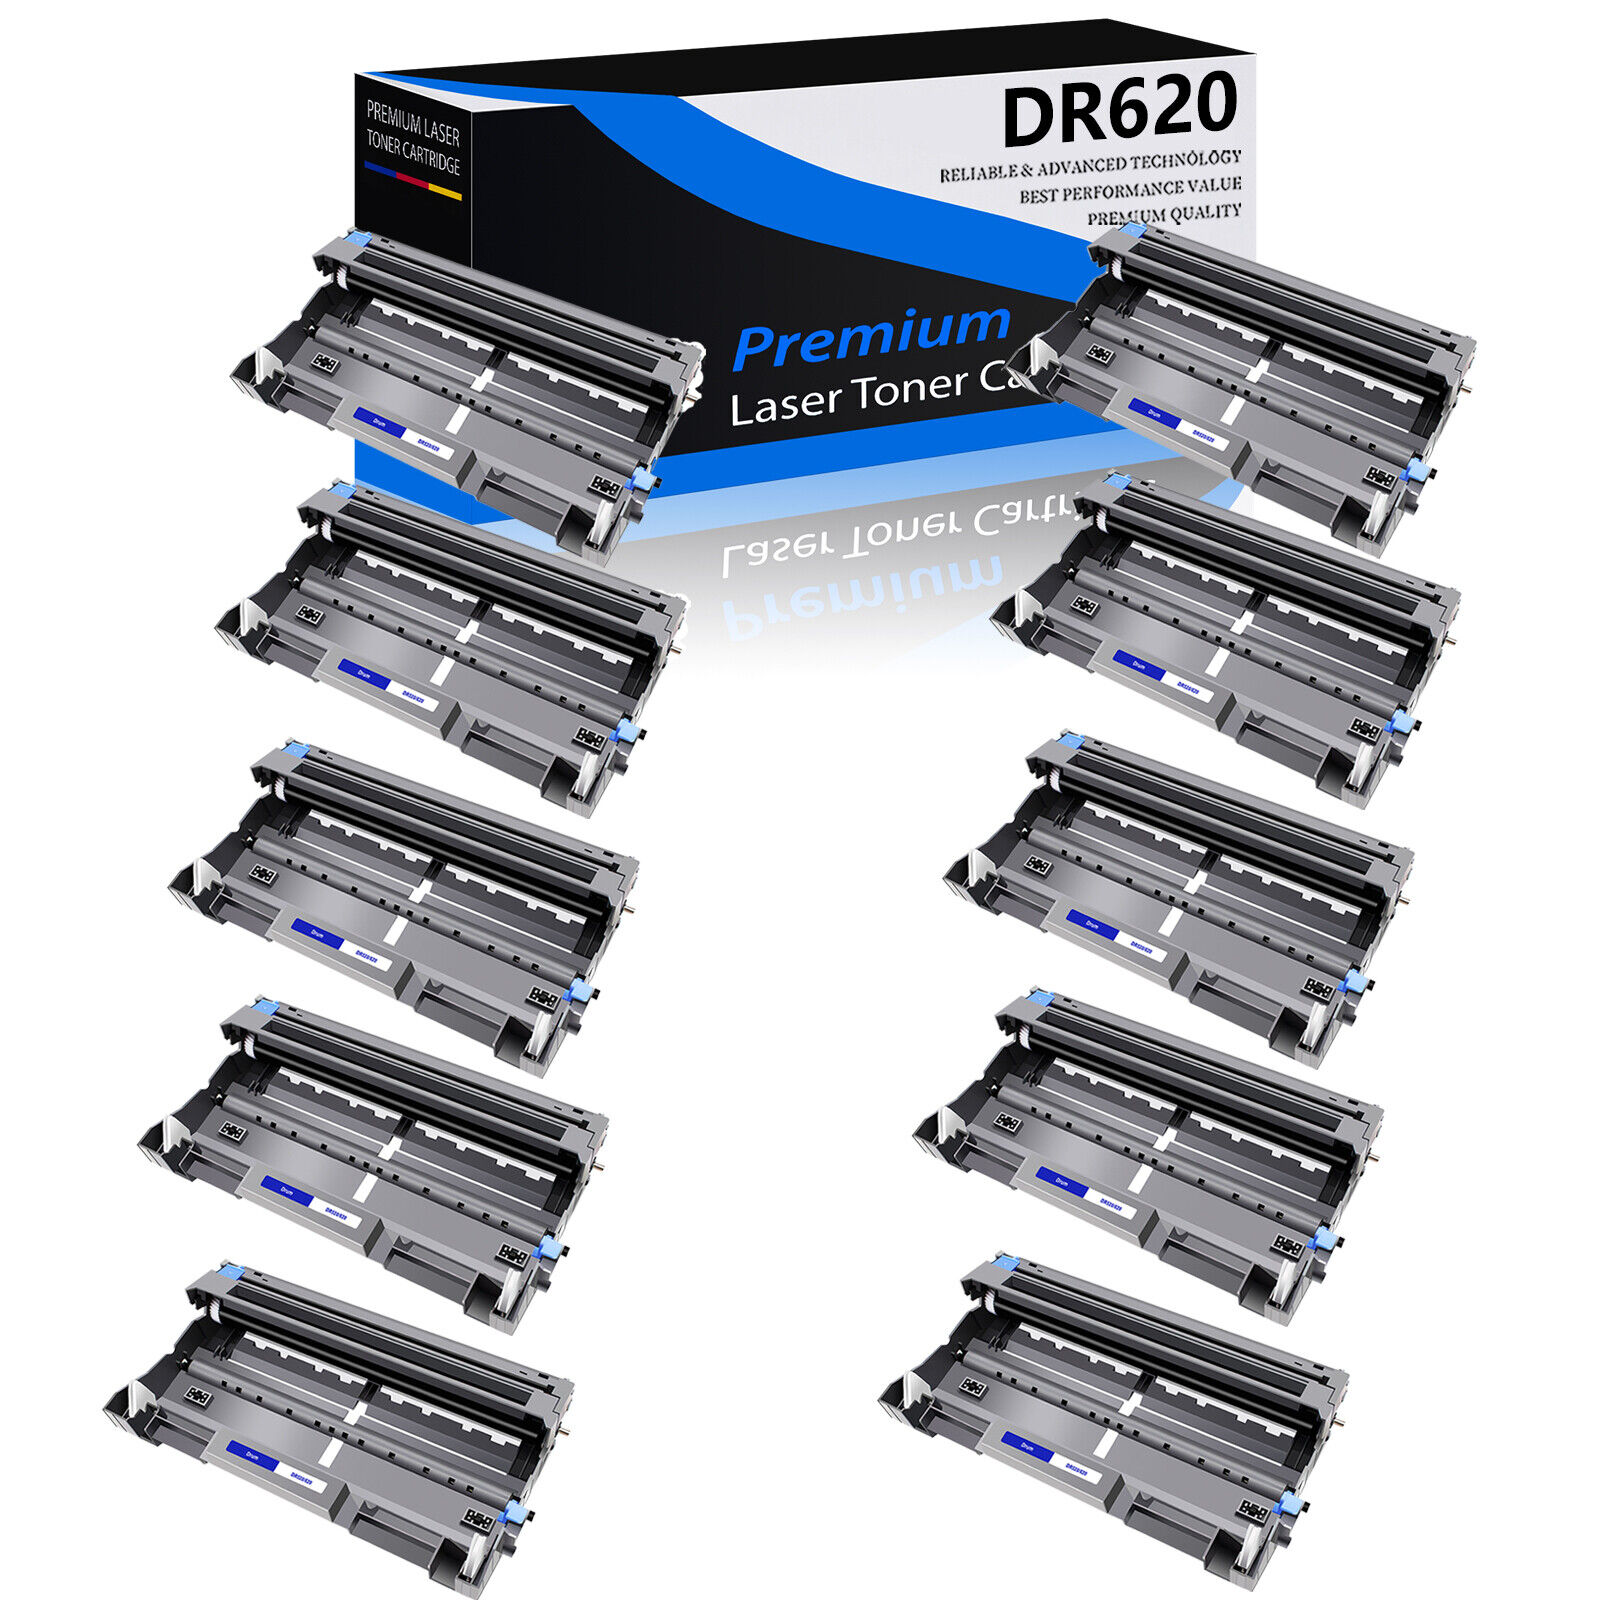 10PK DR620 Drum Unit Compatible with Brother MFC-8480DN 8680DN 8690DW MFC-8890DW